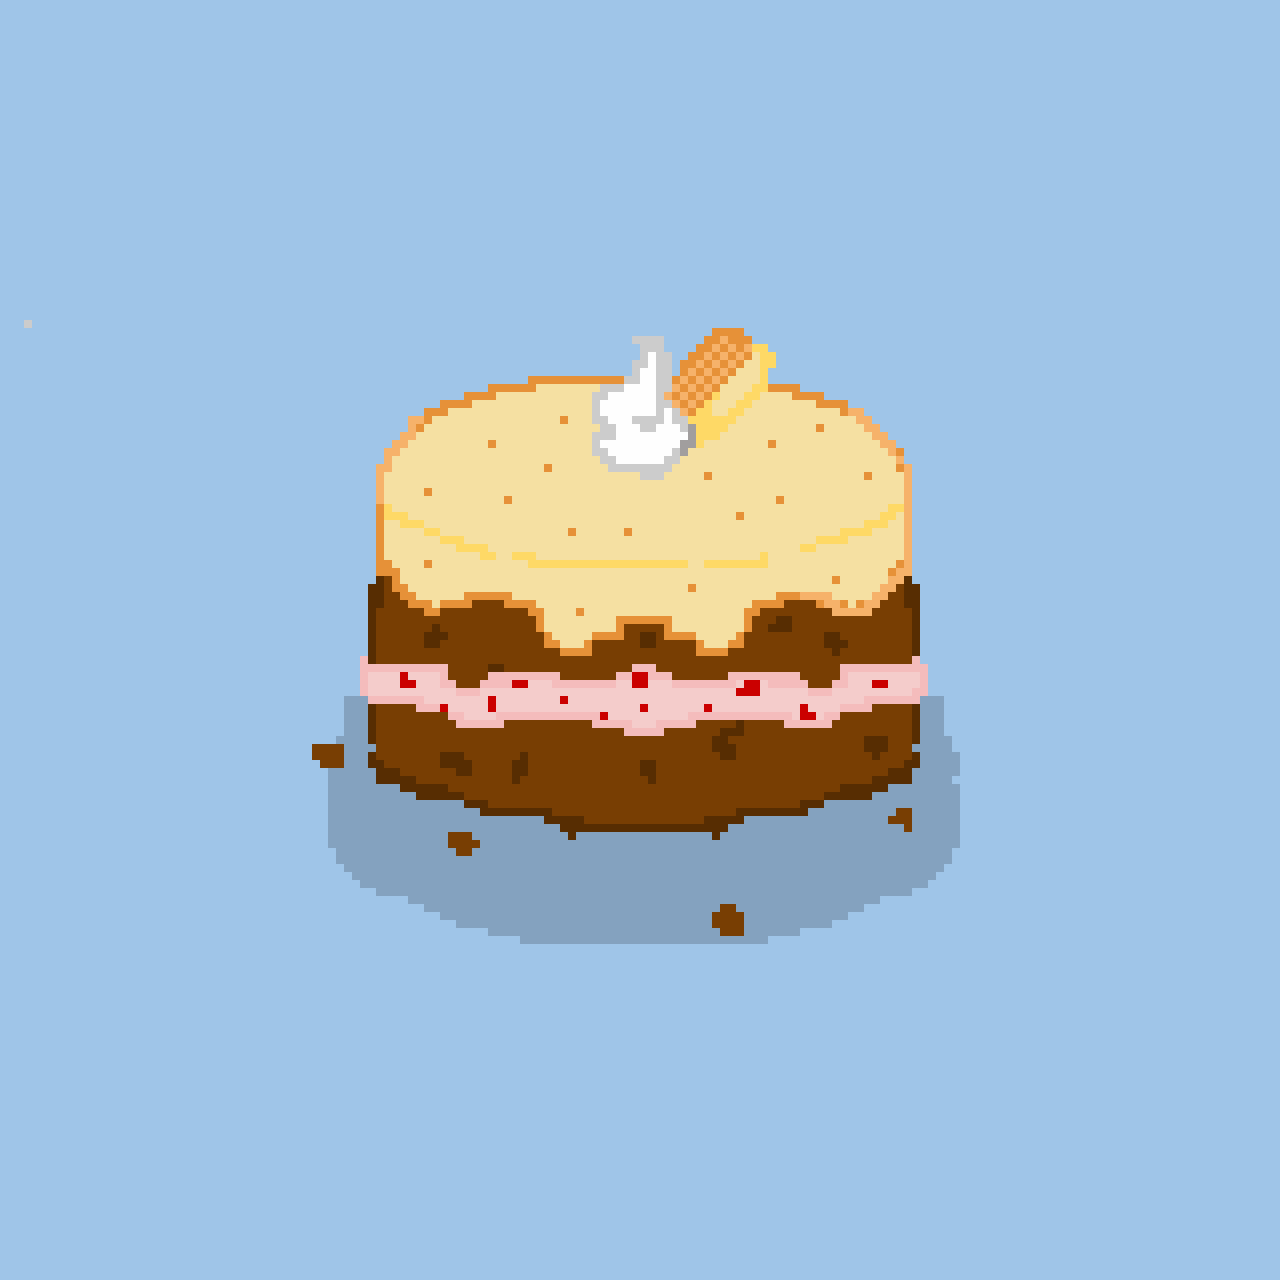 @Snubbie_Fox challenged us to eat le cake, A small bite for pixel art, A giant chomp for pixelkind!